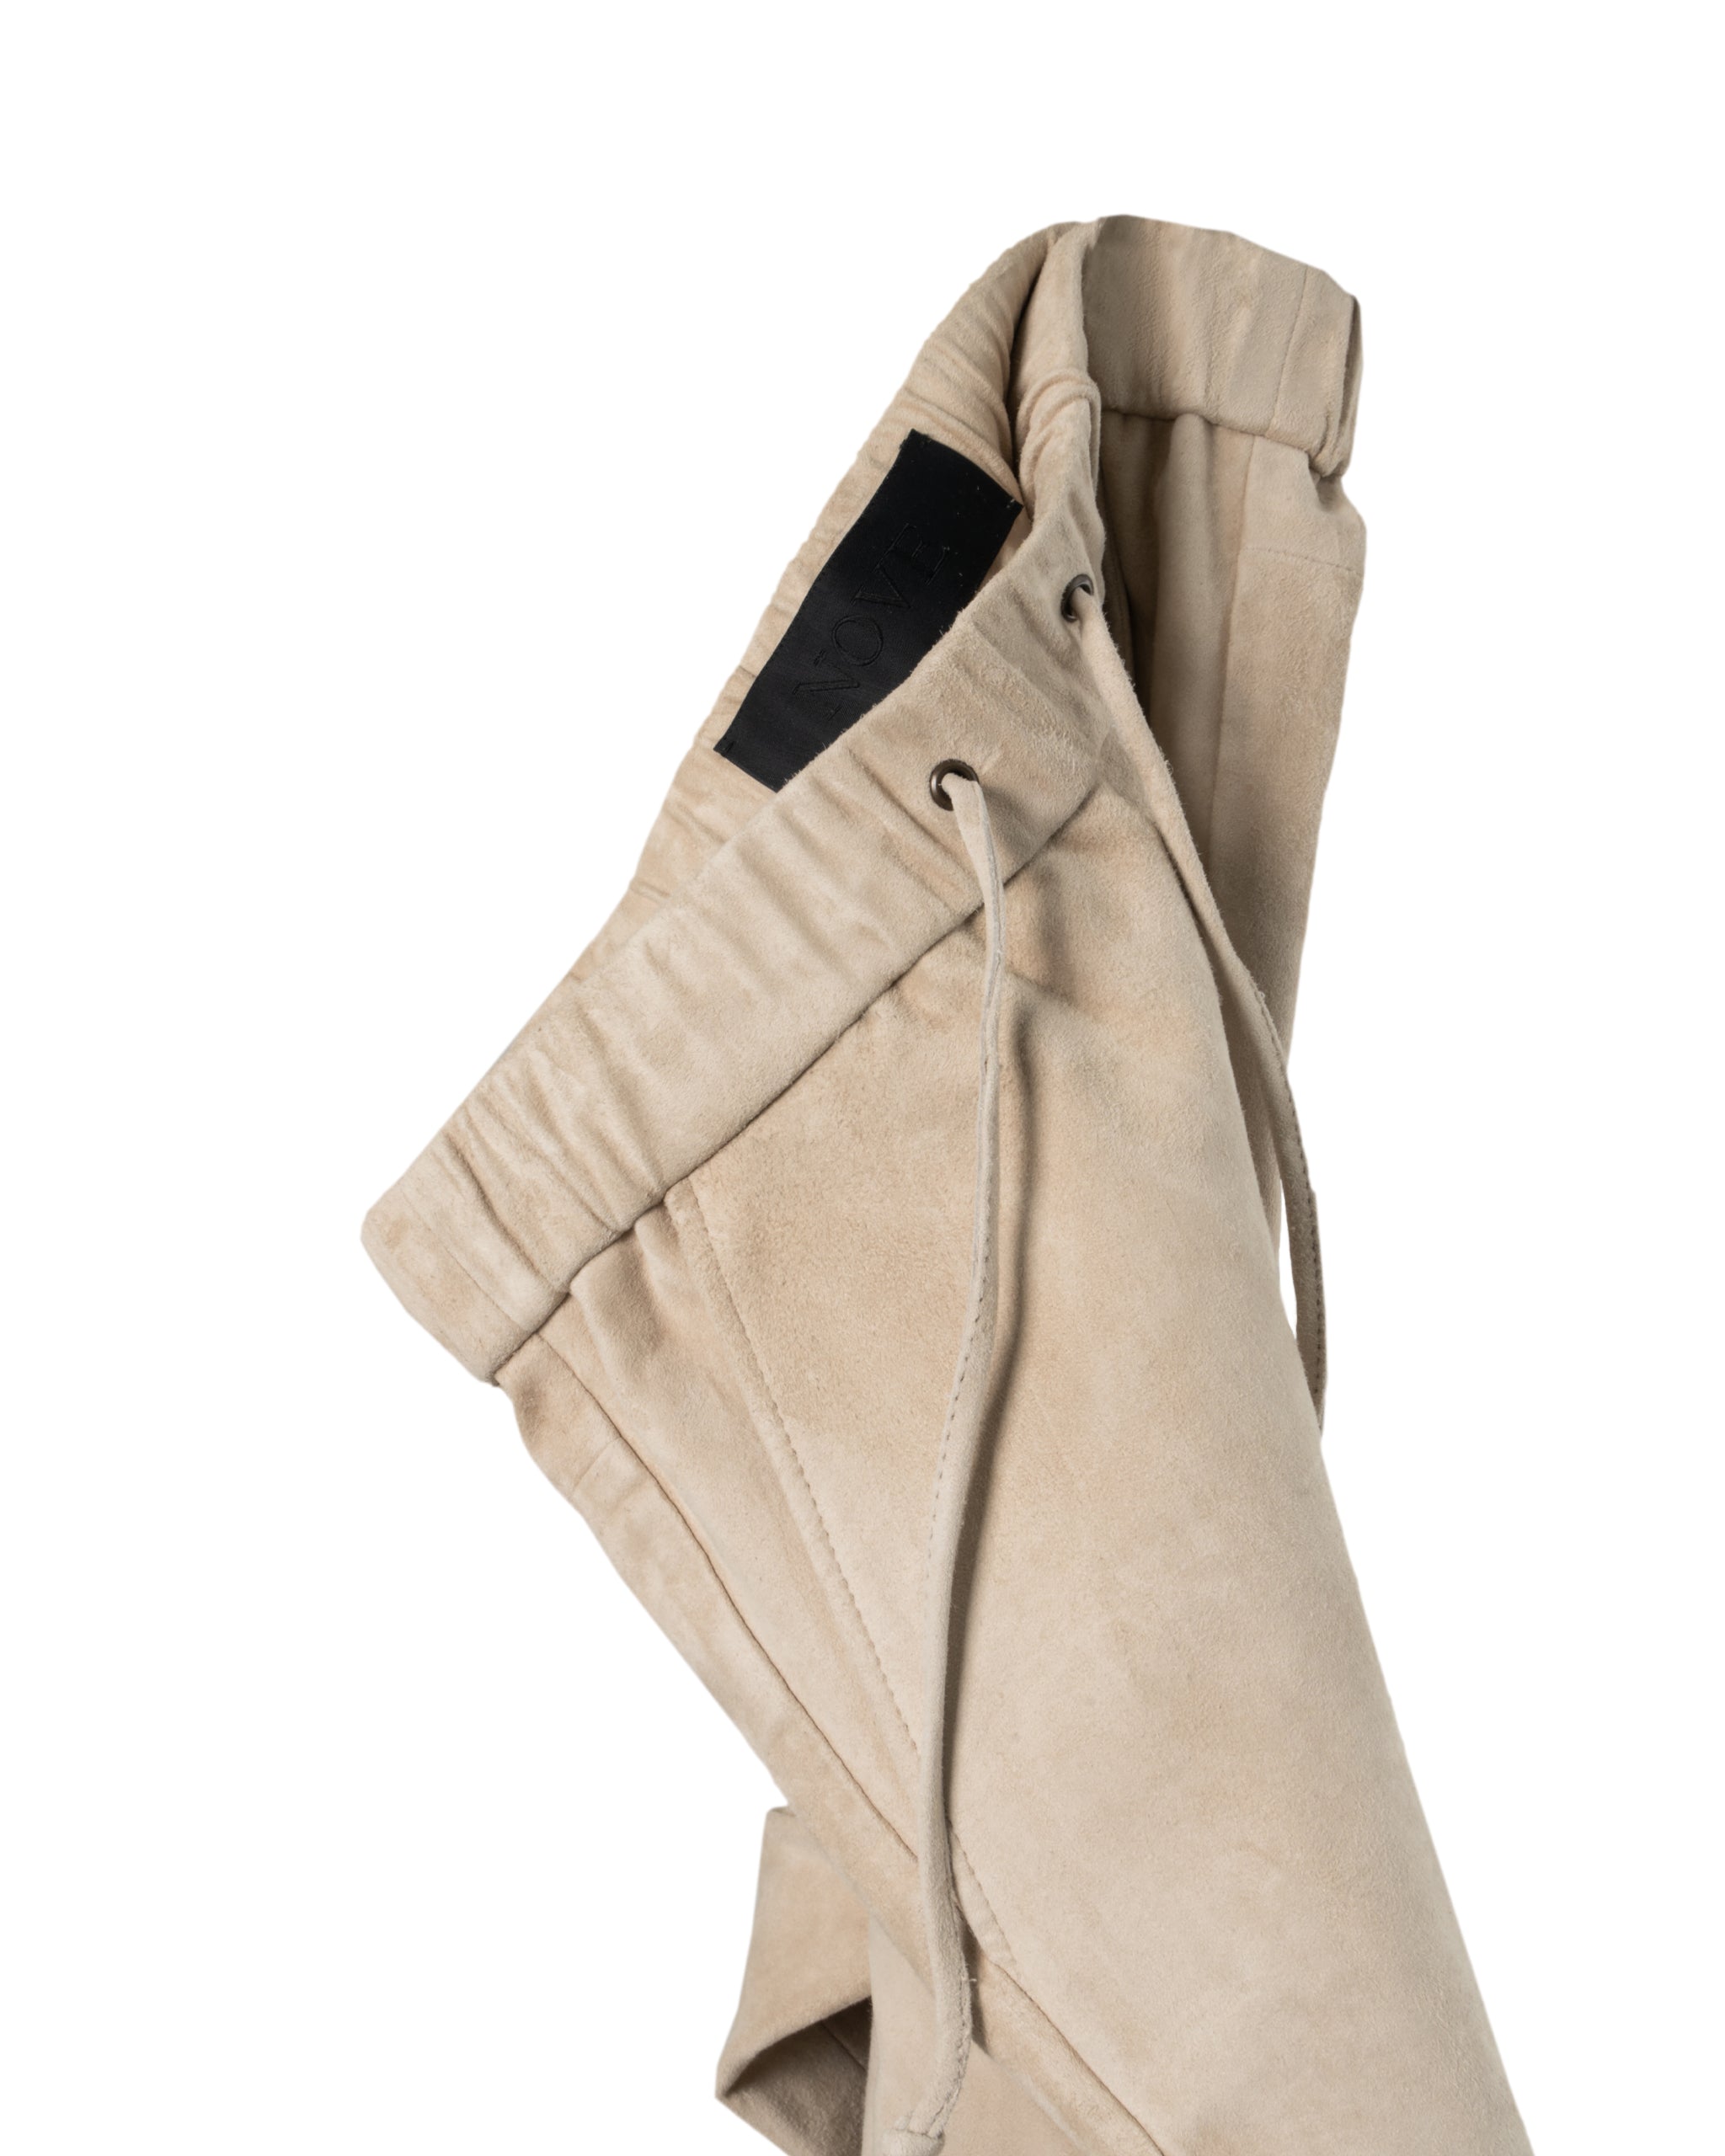 SUEDE STRETCH LEATHER JOGG PANTS